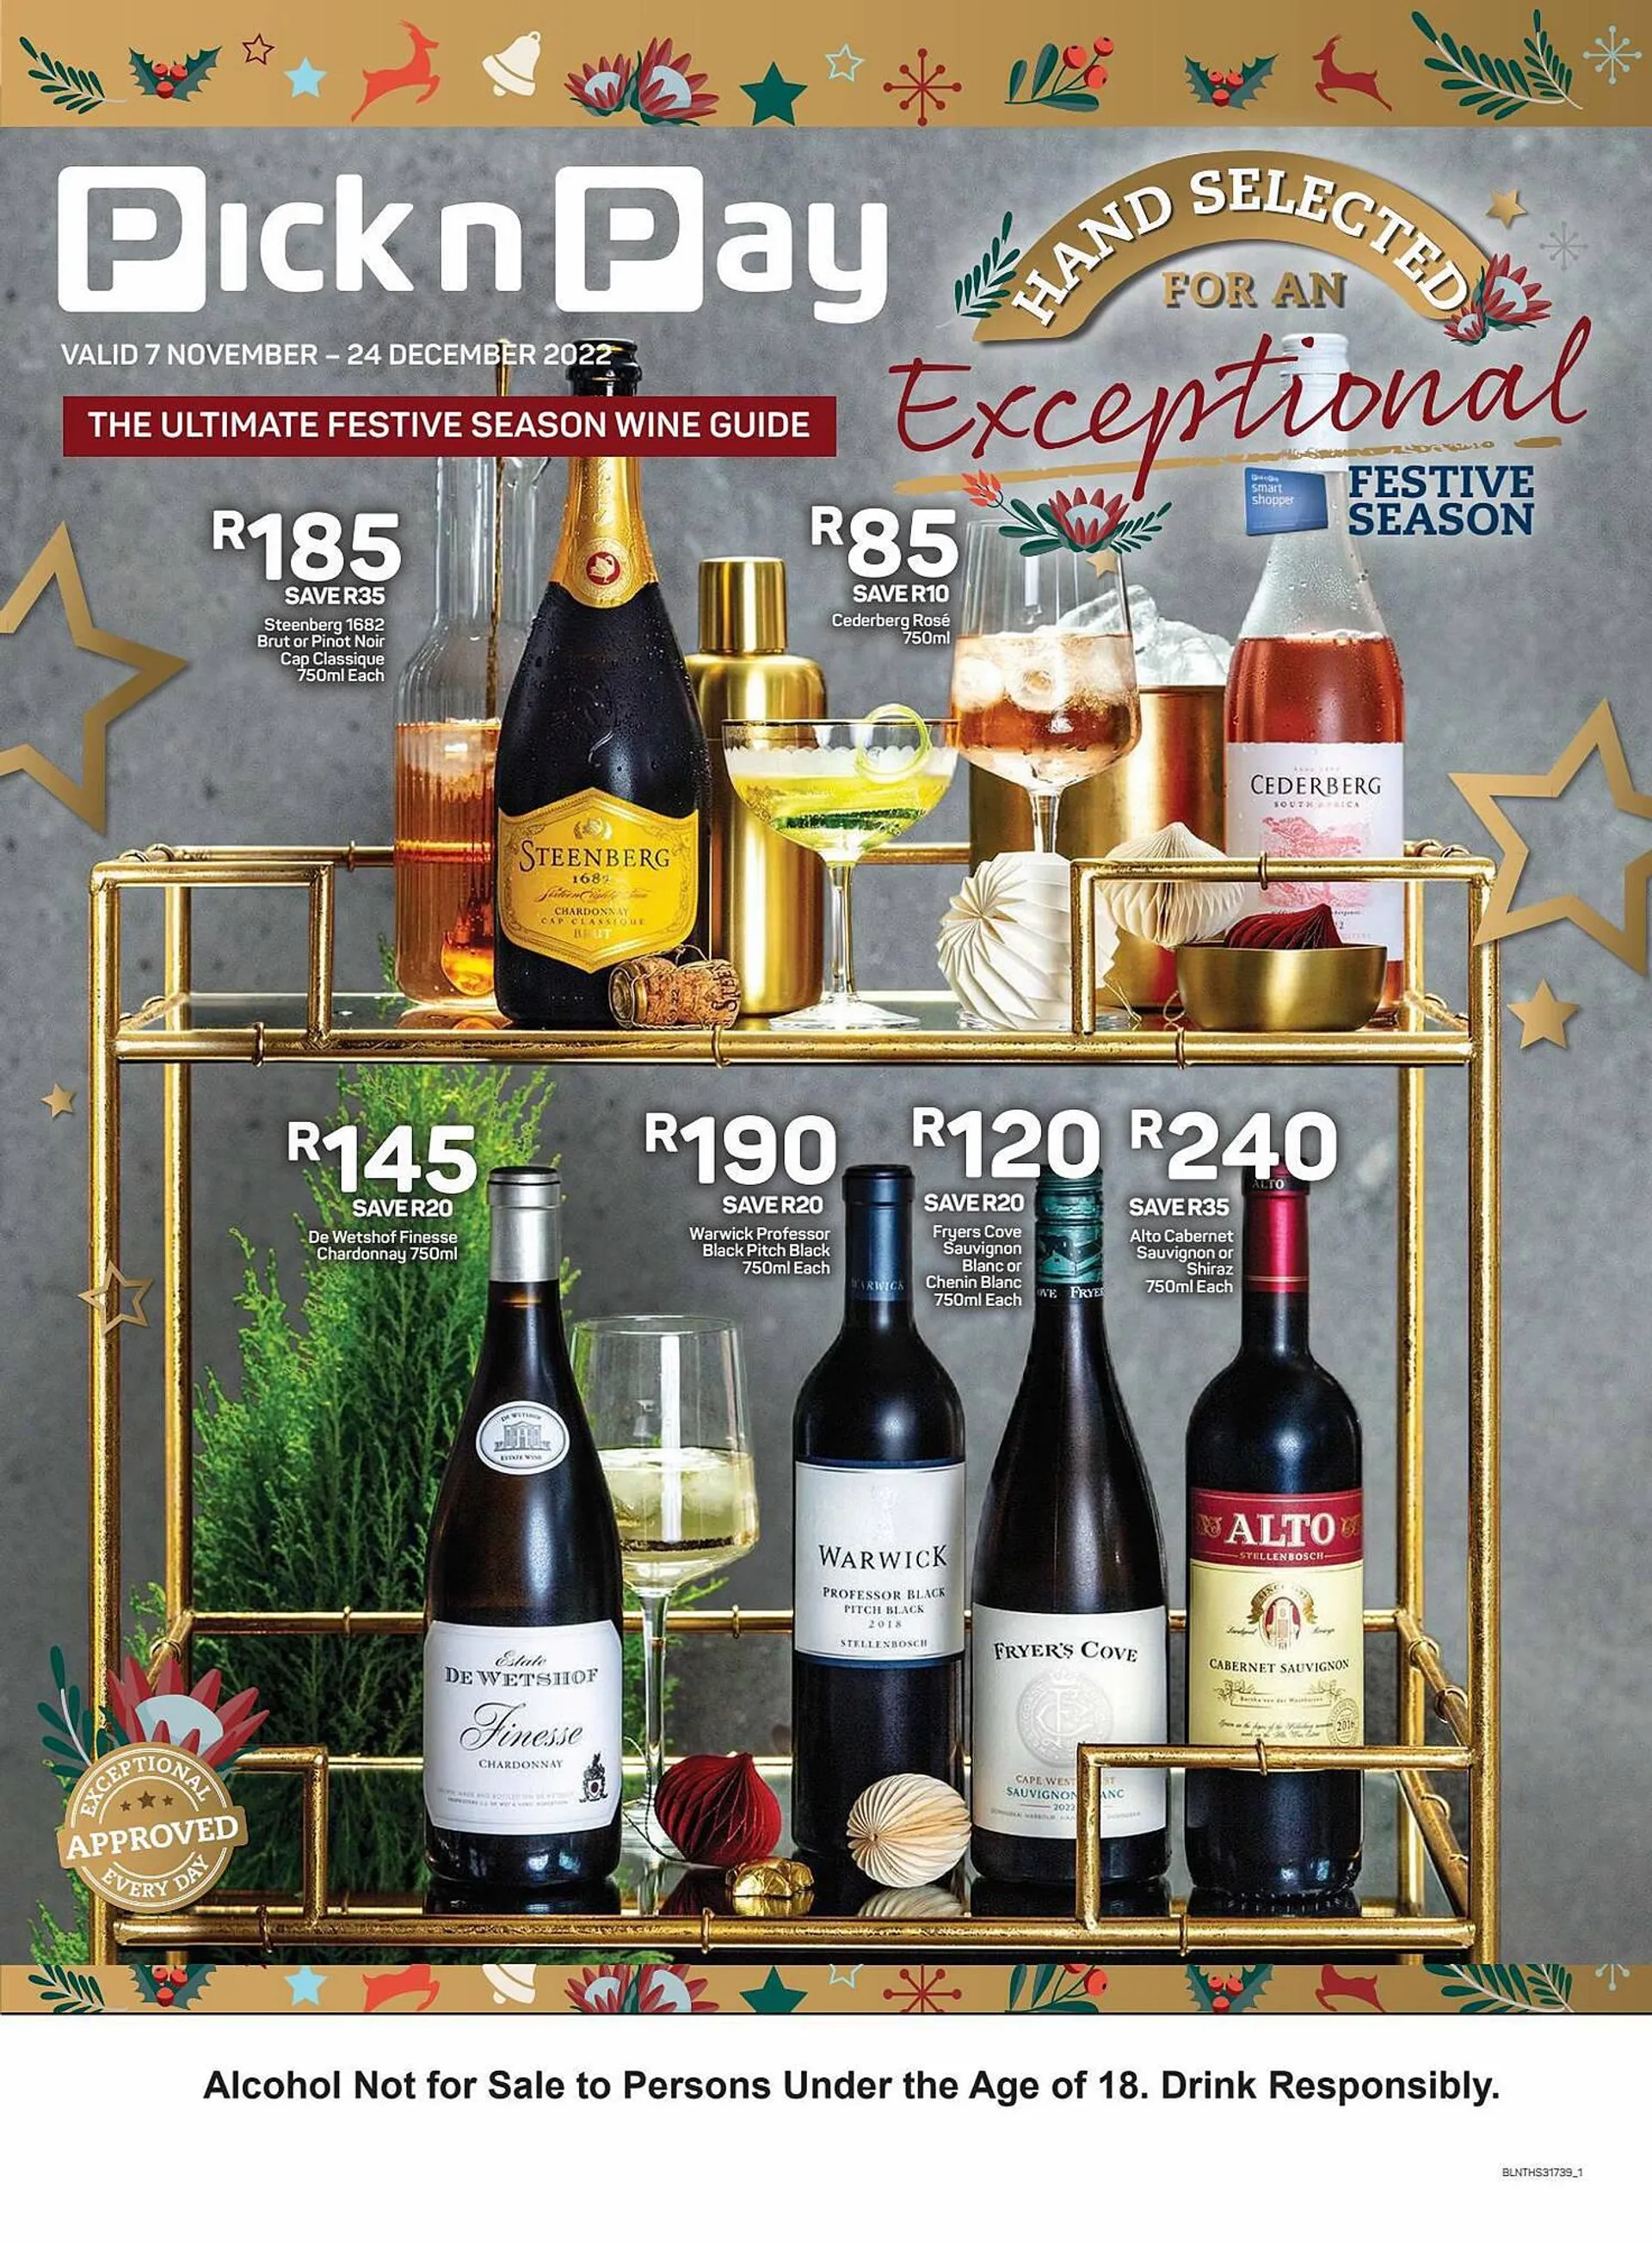 Pick n Pay catalogue - Wine guide - 1